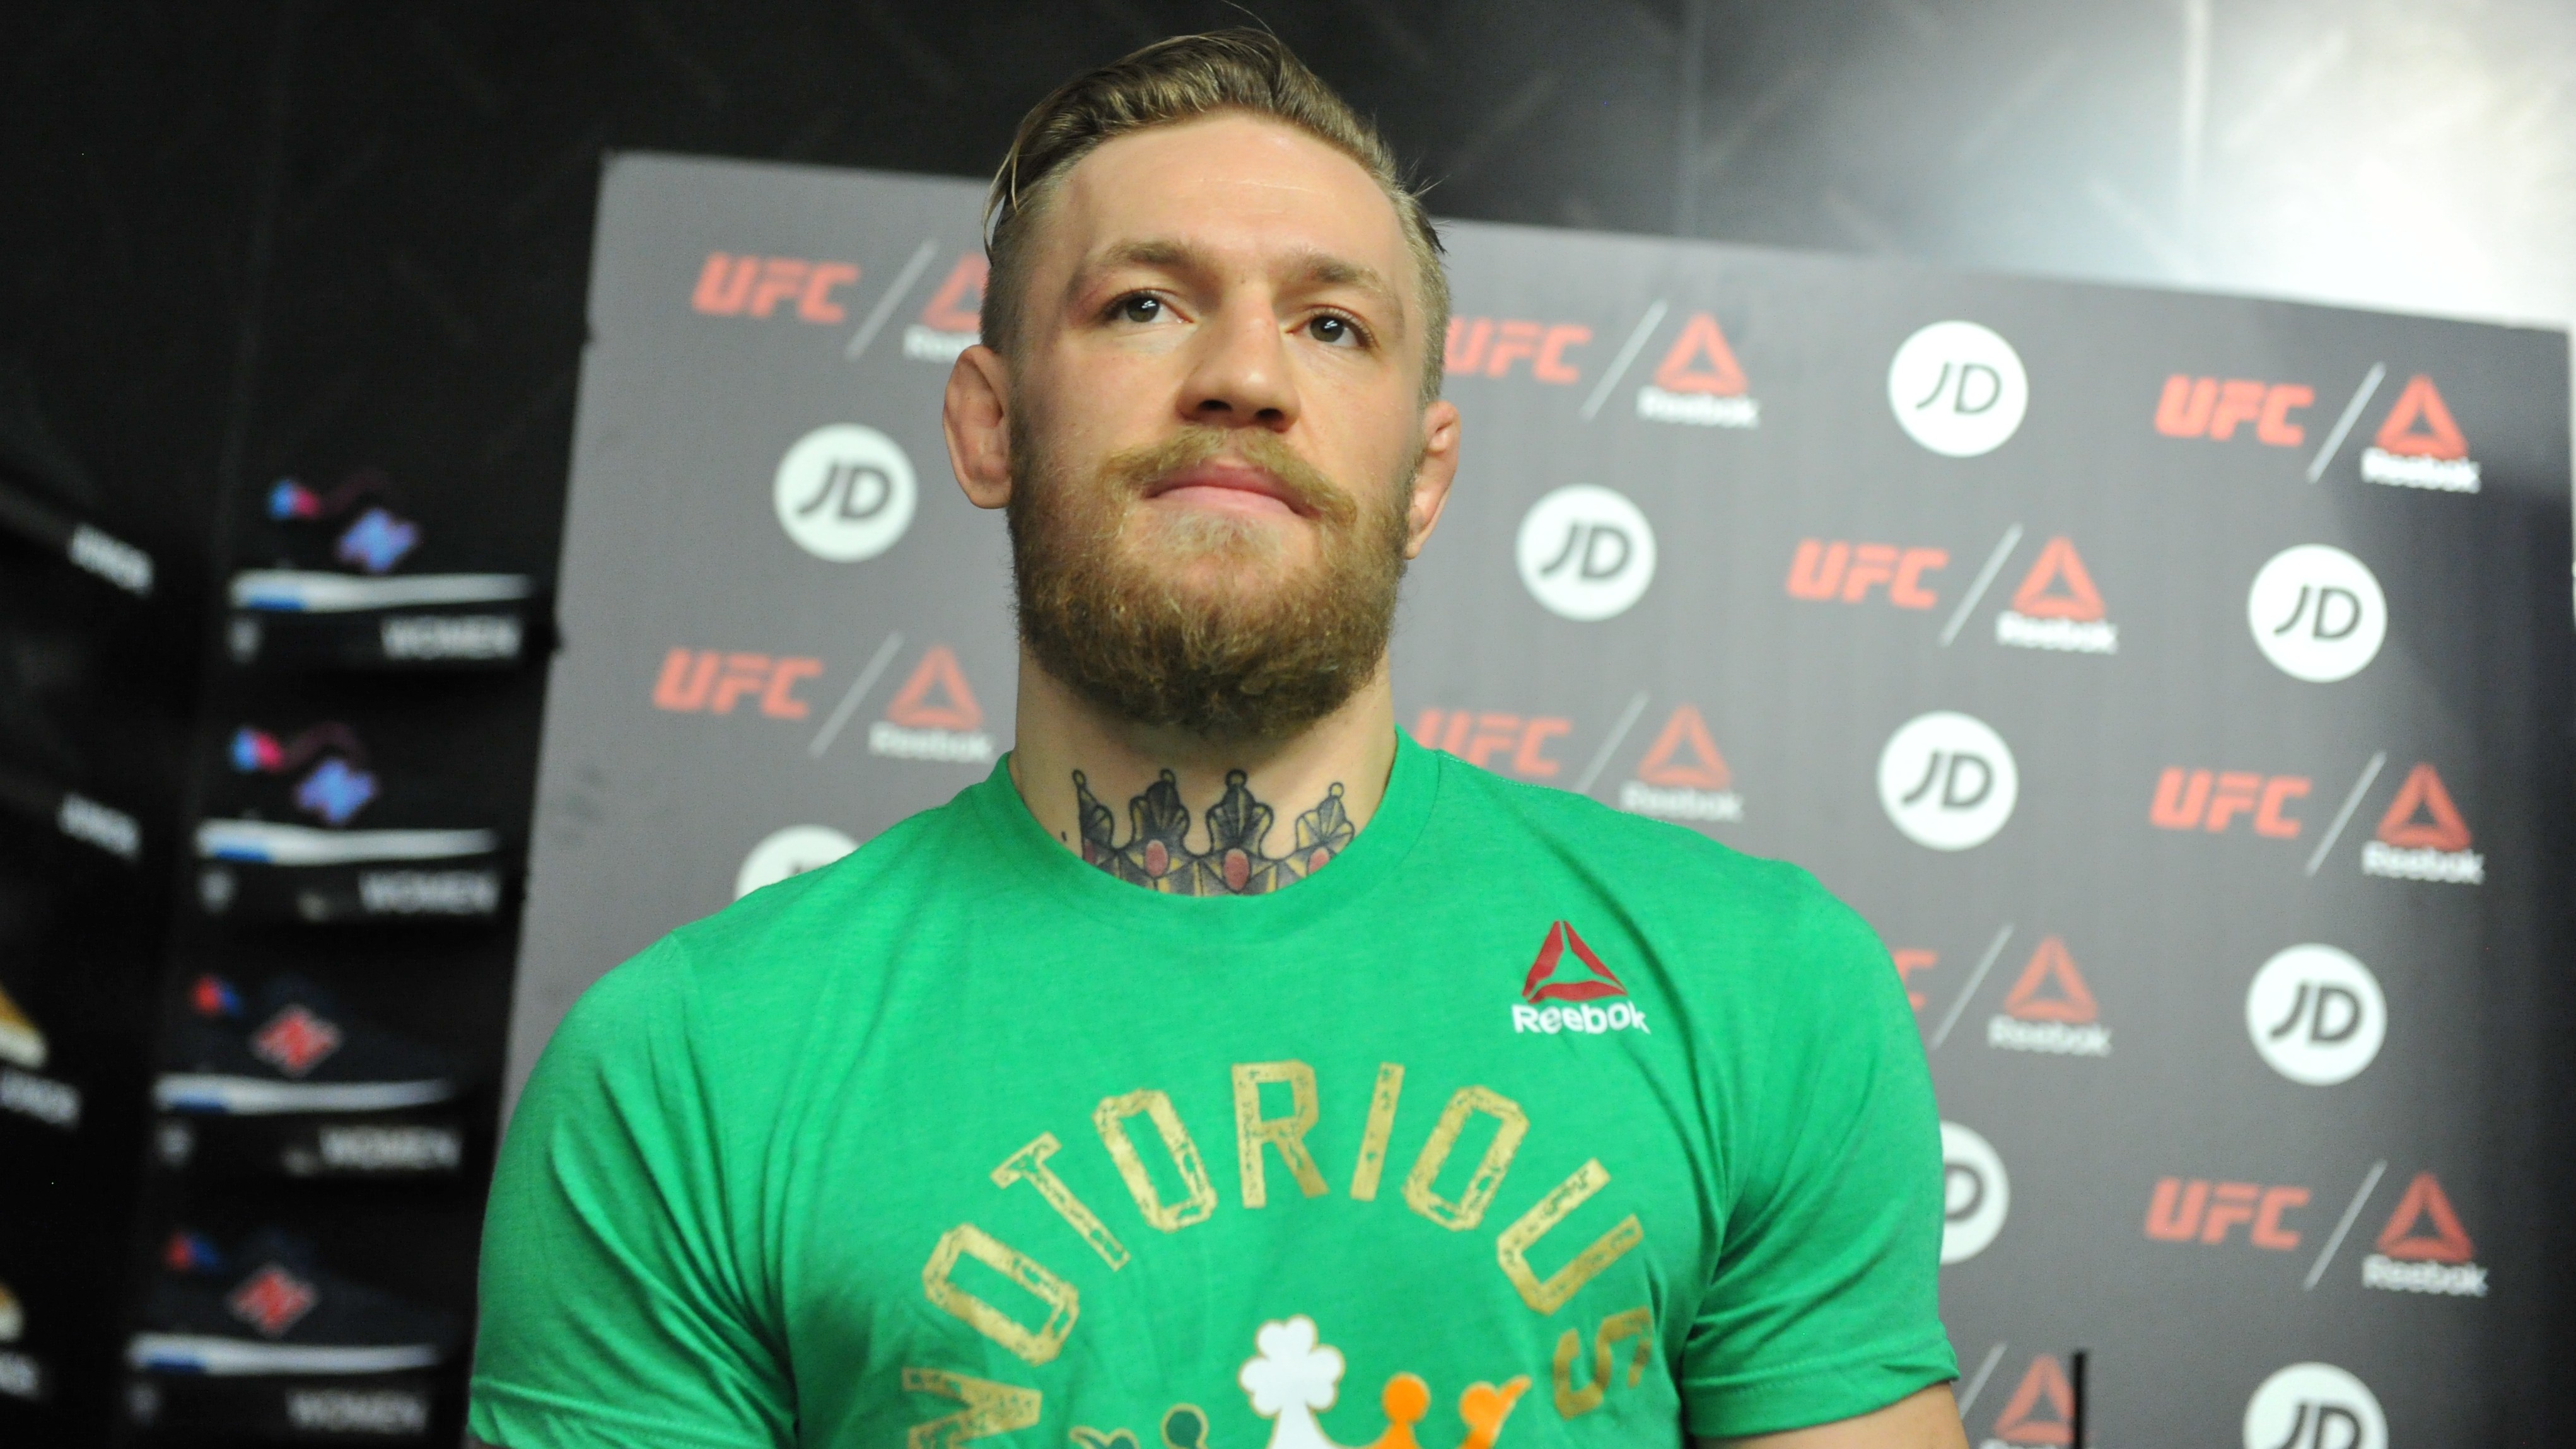 Conor McGregor Next Fight What Date, Time, Opponent